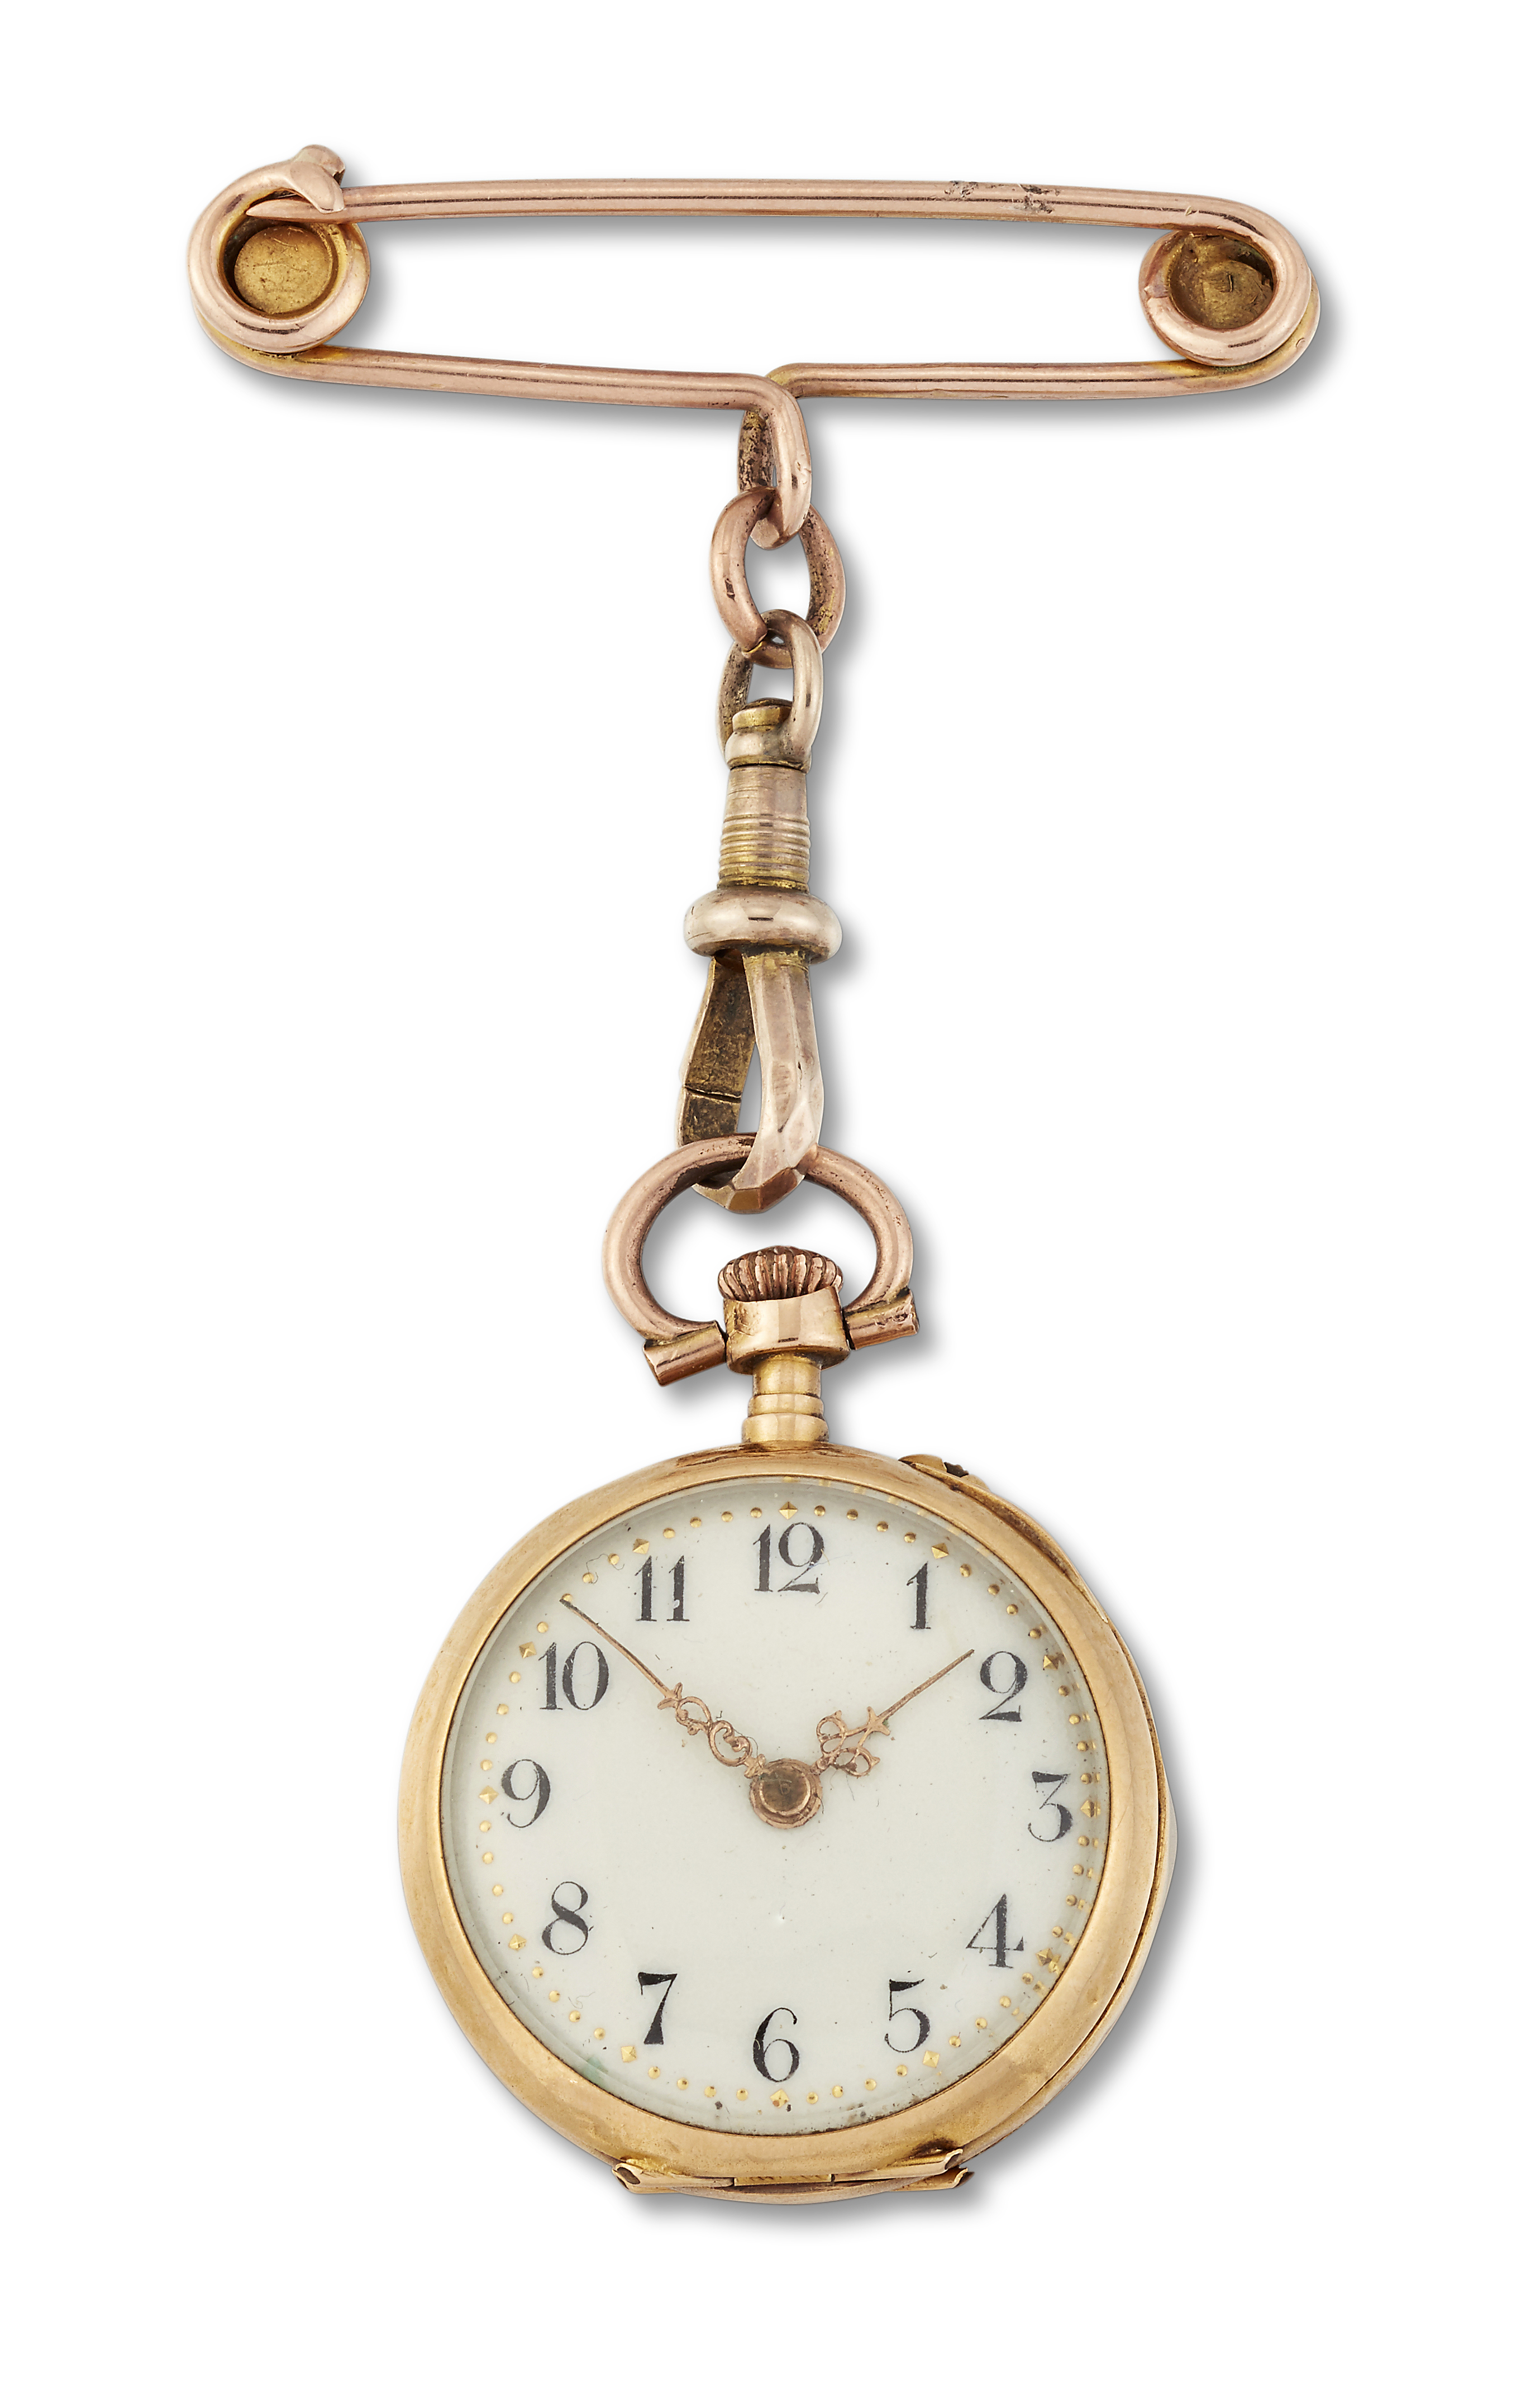 AN 18 CARAT GOLD LADY'S FRENCH FOB WATCH - Image 2 of 2